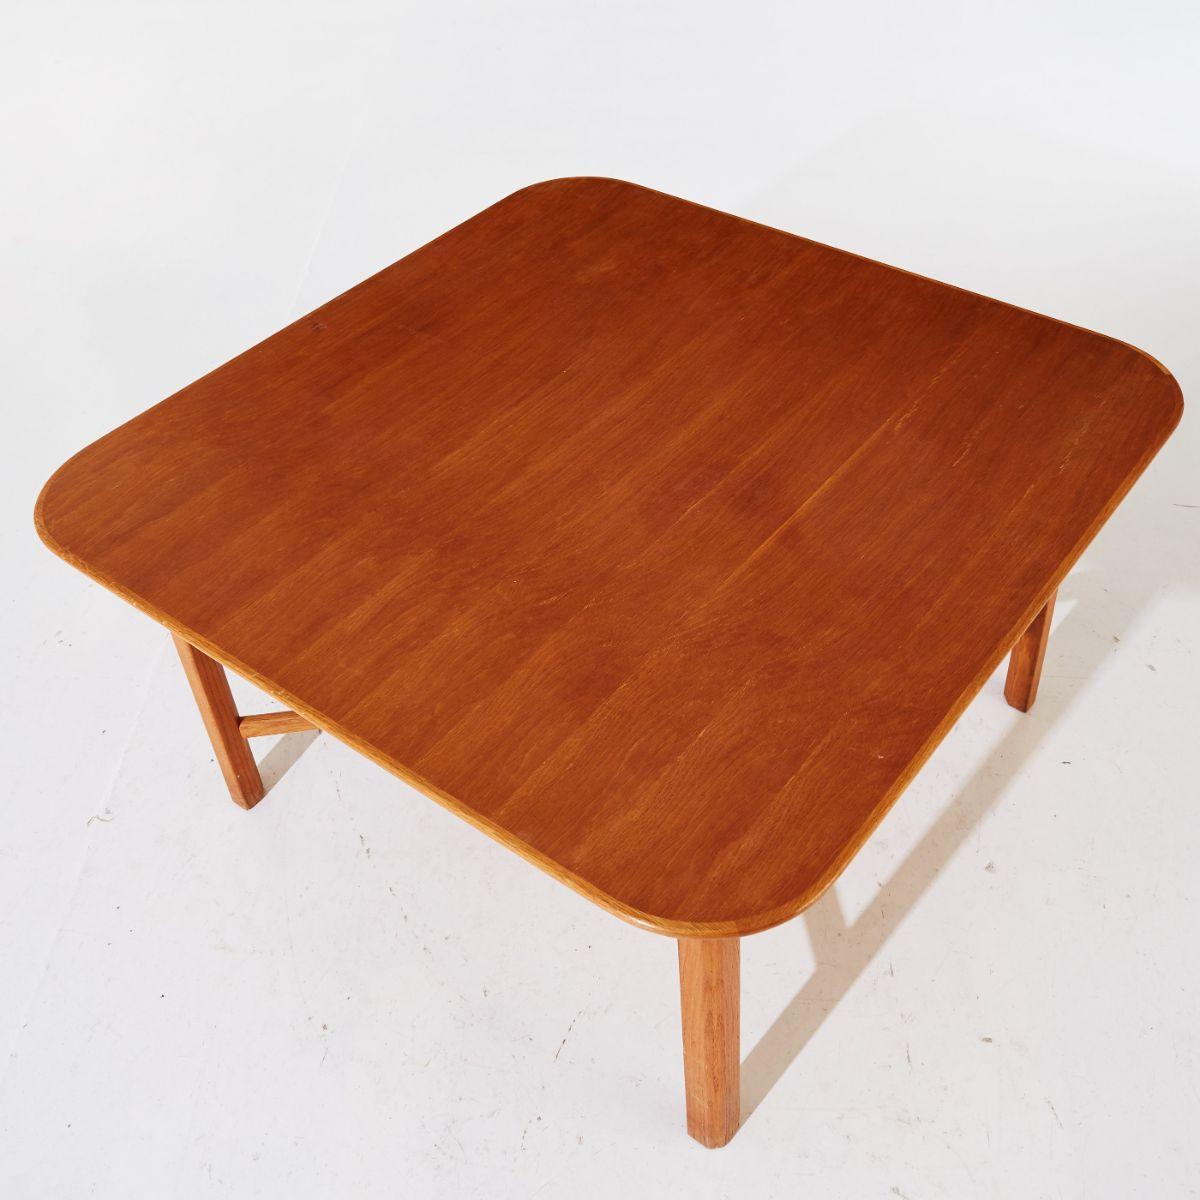 Carl Malmsten was a legend in the world of traditional Swedish craftsmanship, and this stylish coffee table is a near-perfect example of mid-century design excellence. Veneered in drop-dead gorgeous oak, it perfectly illustrates the master furniture